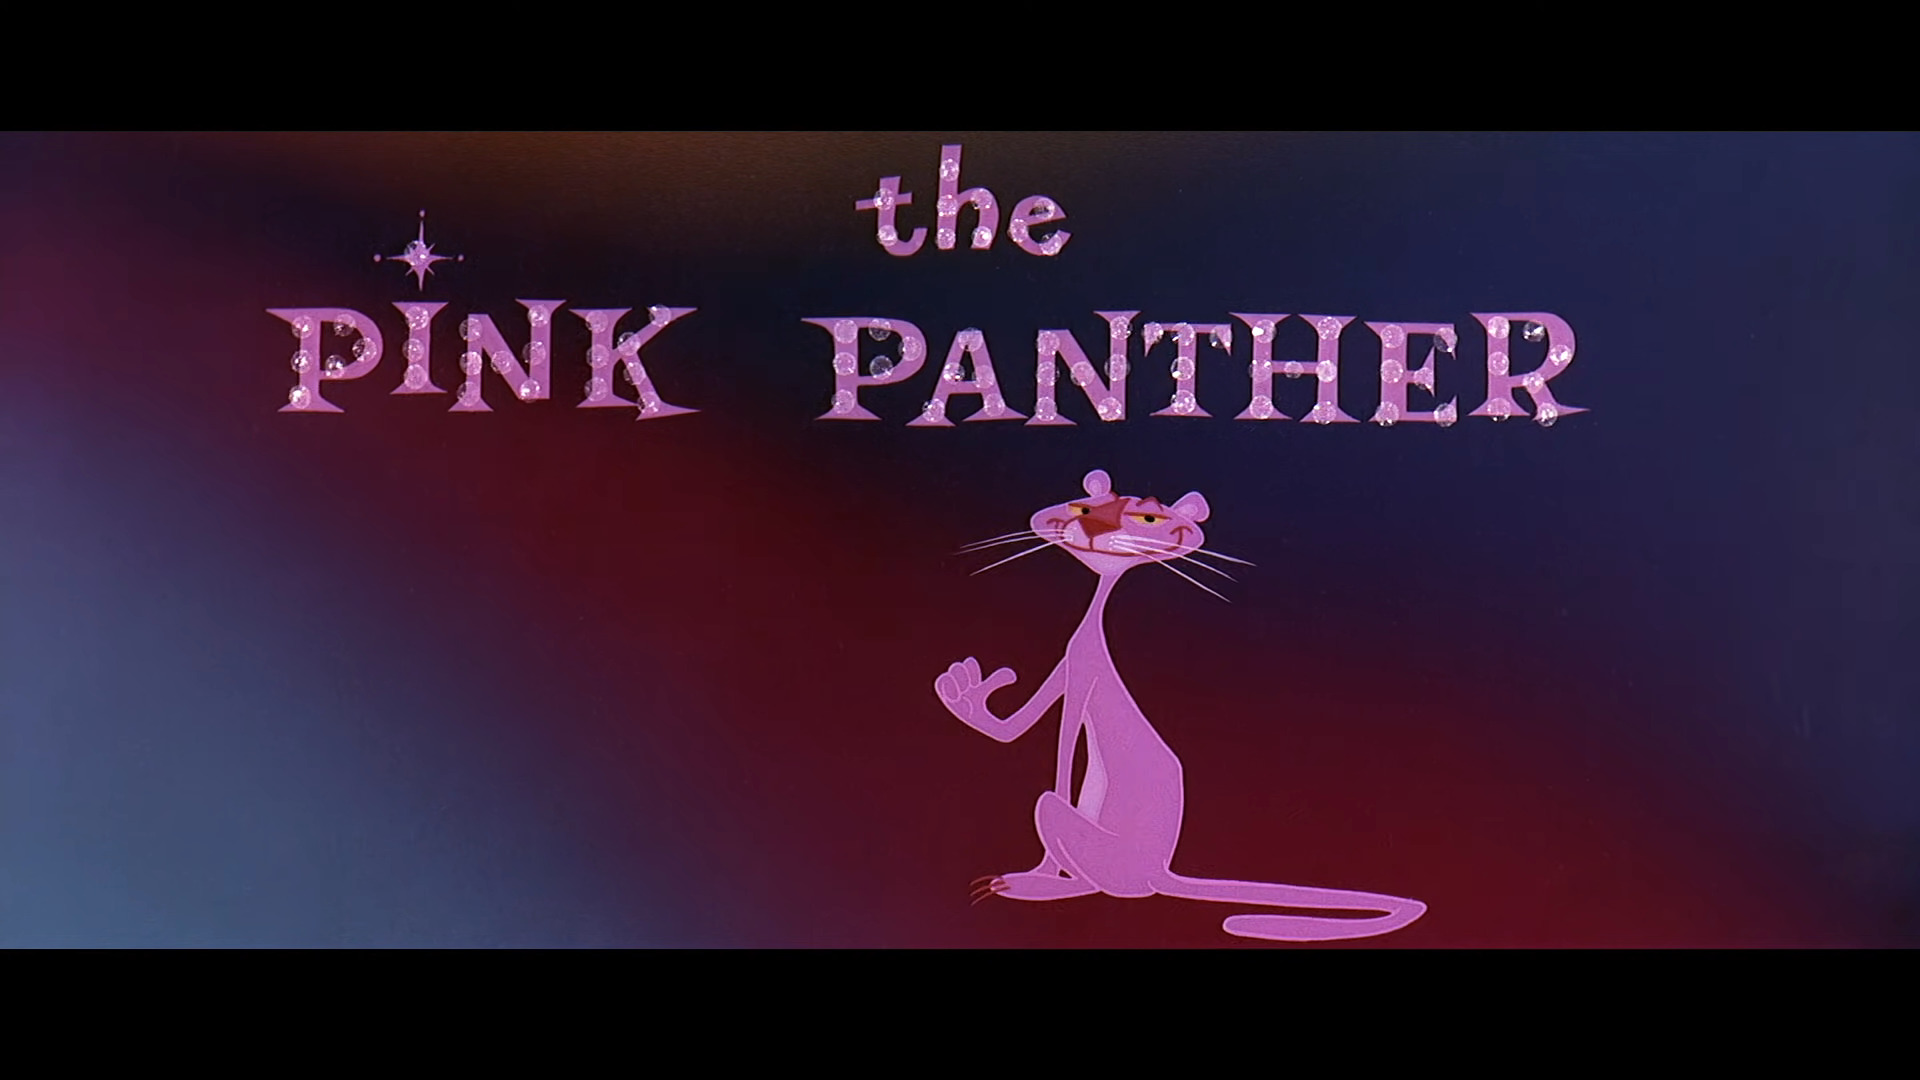 The Pink Panther makes his debut in The Pink Panther (1964), MGM